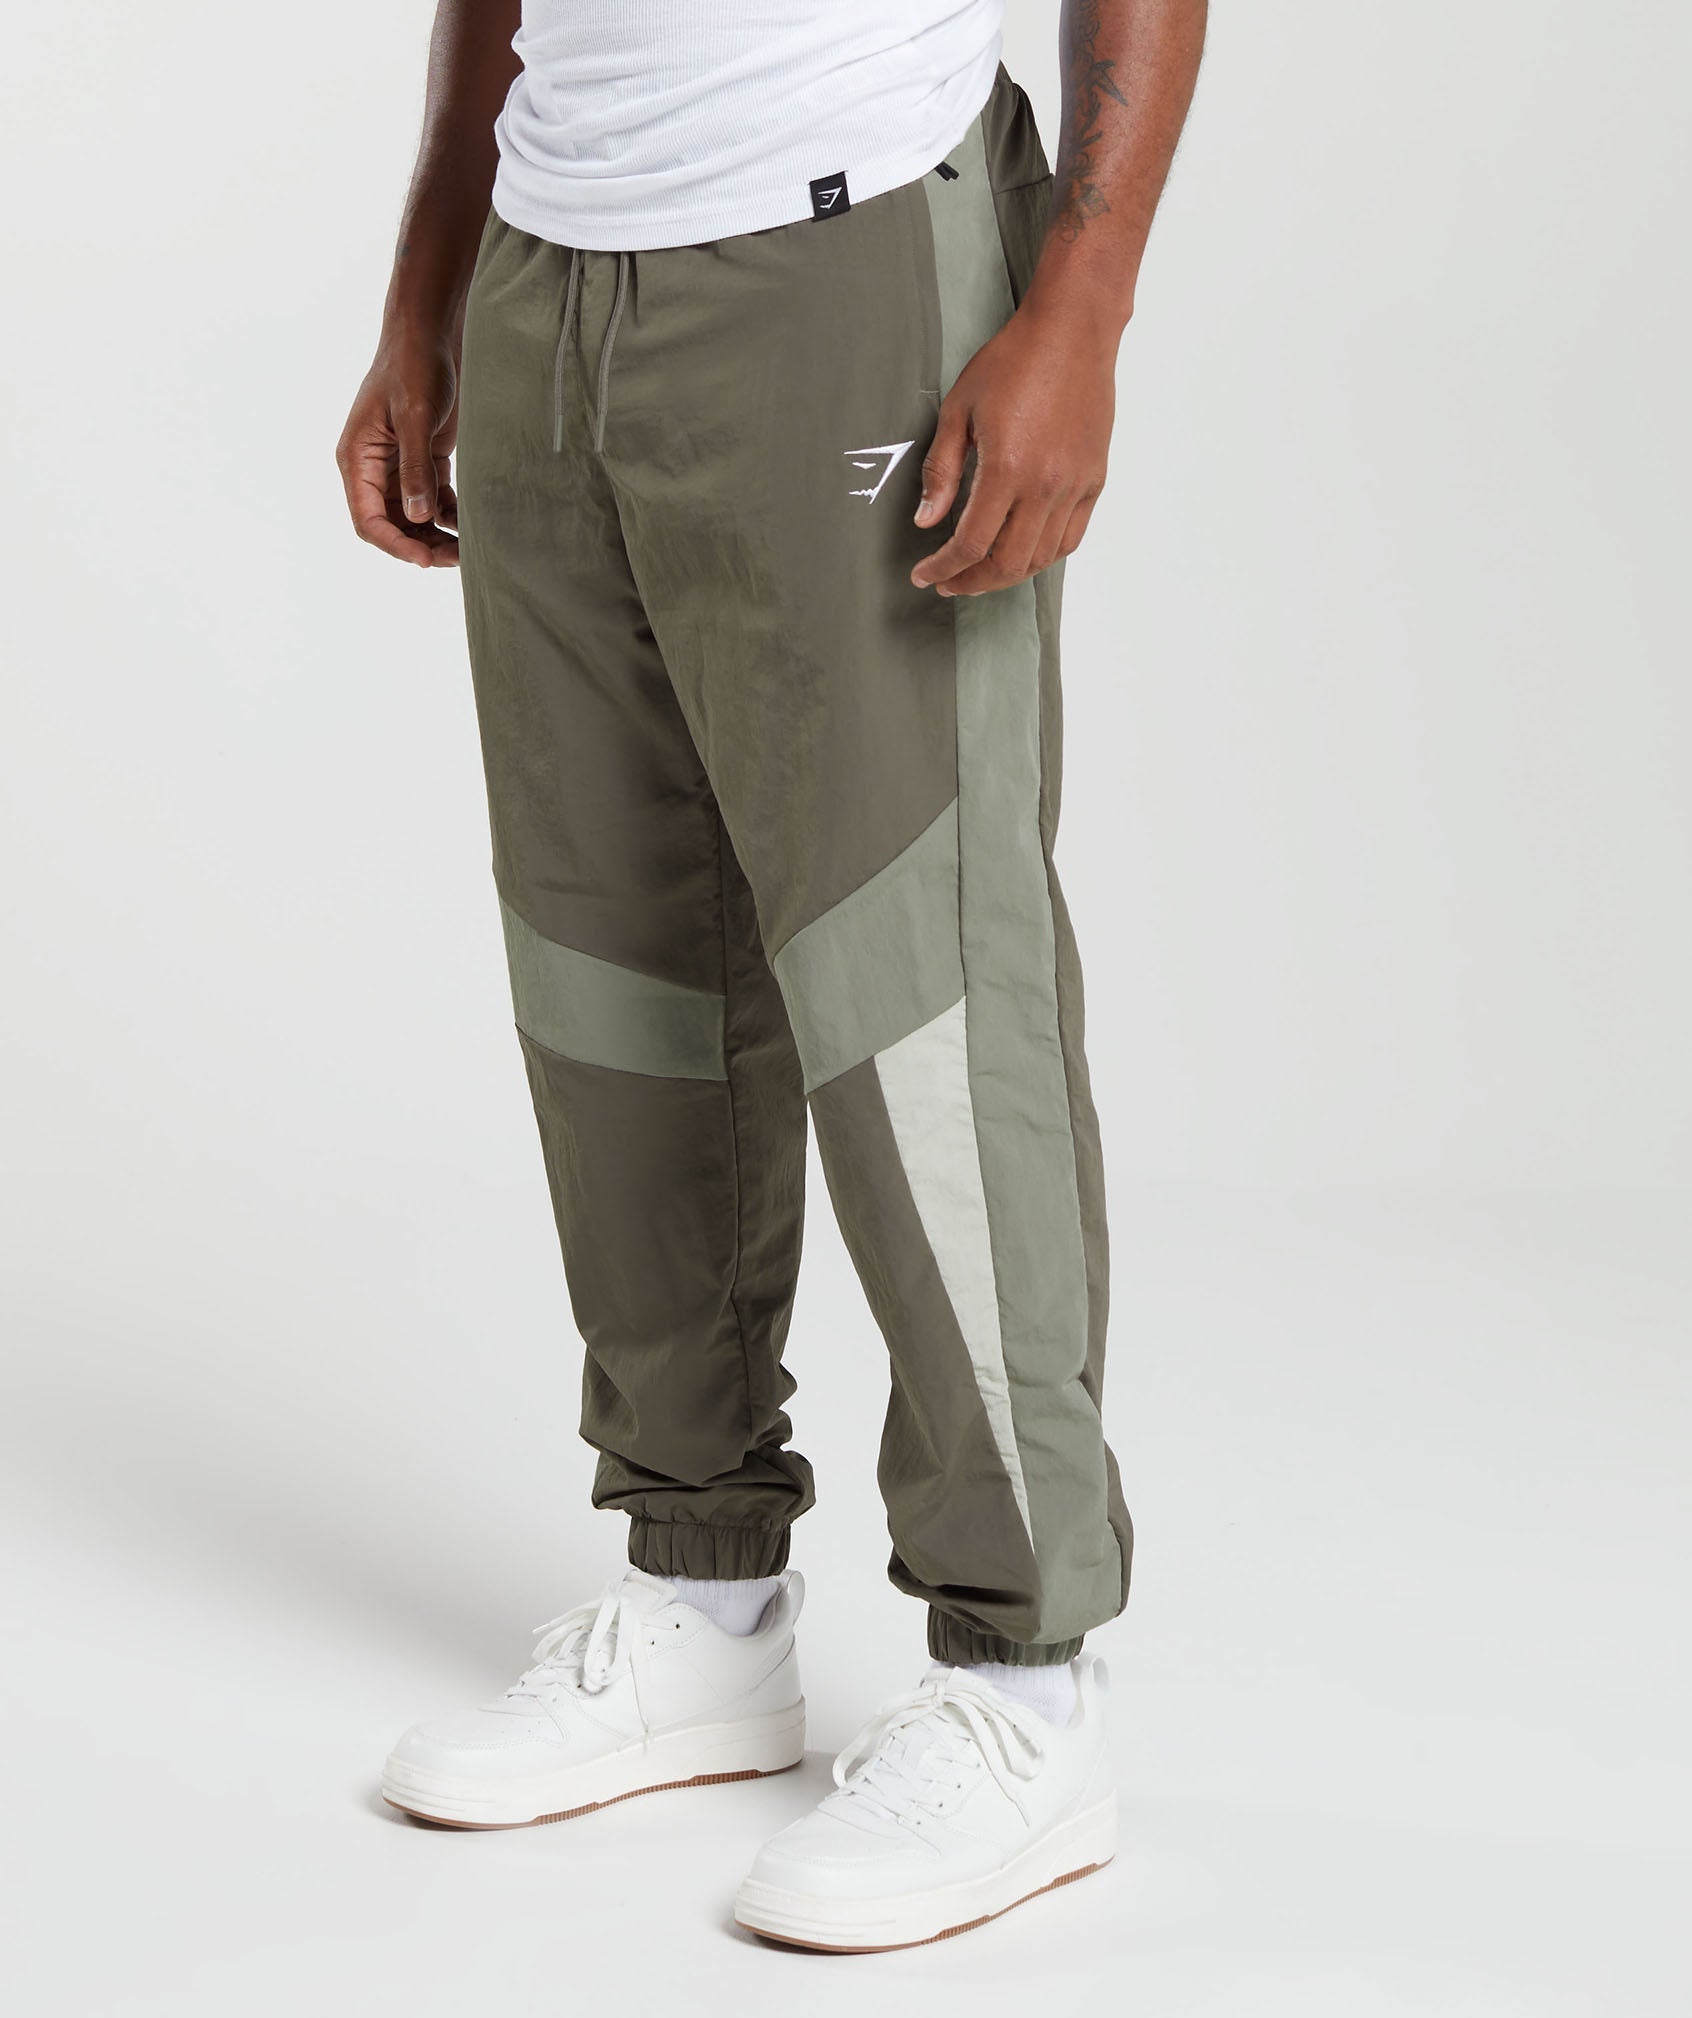 Retro Track Pants in Brown - view 3